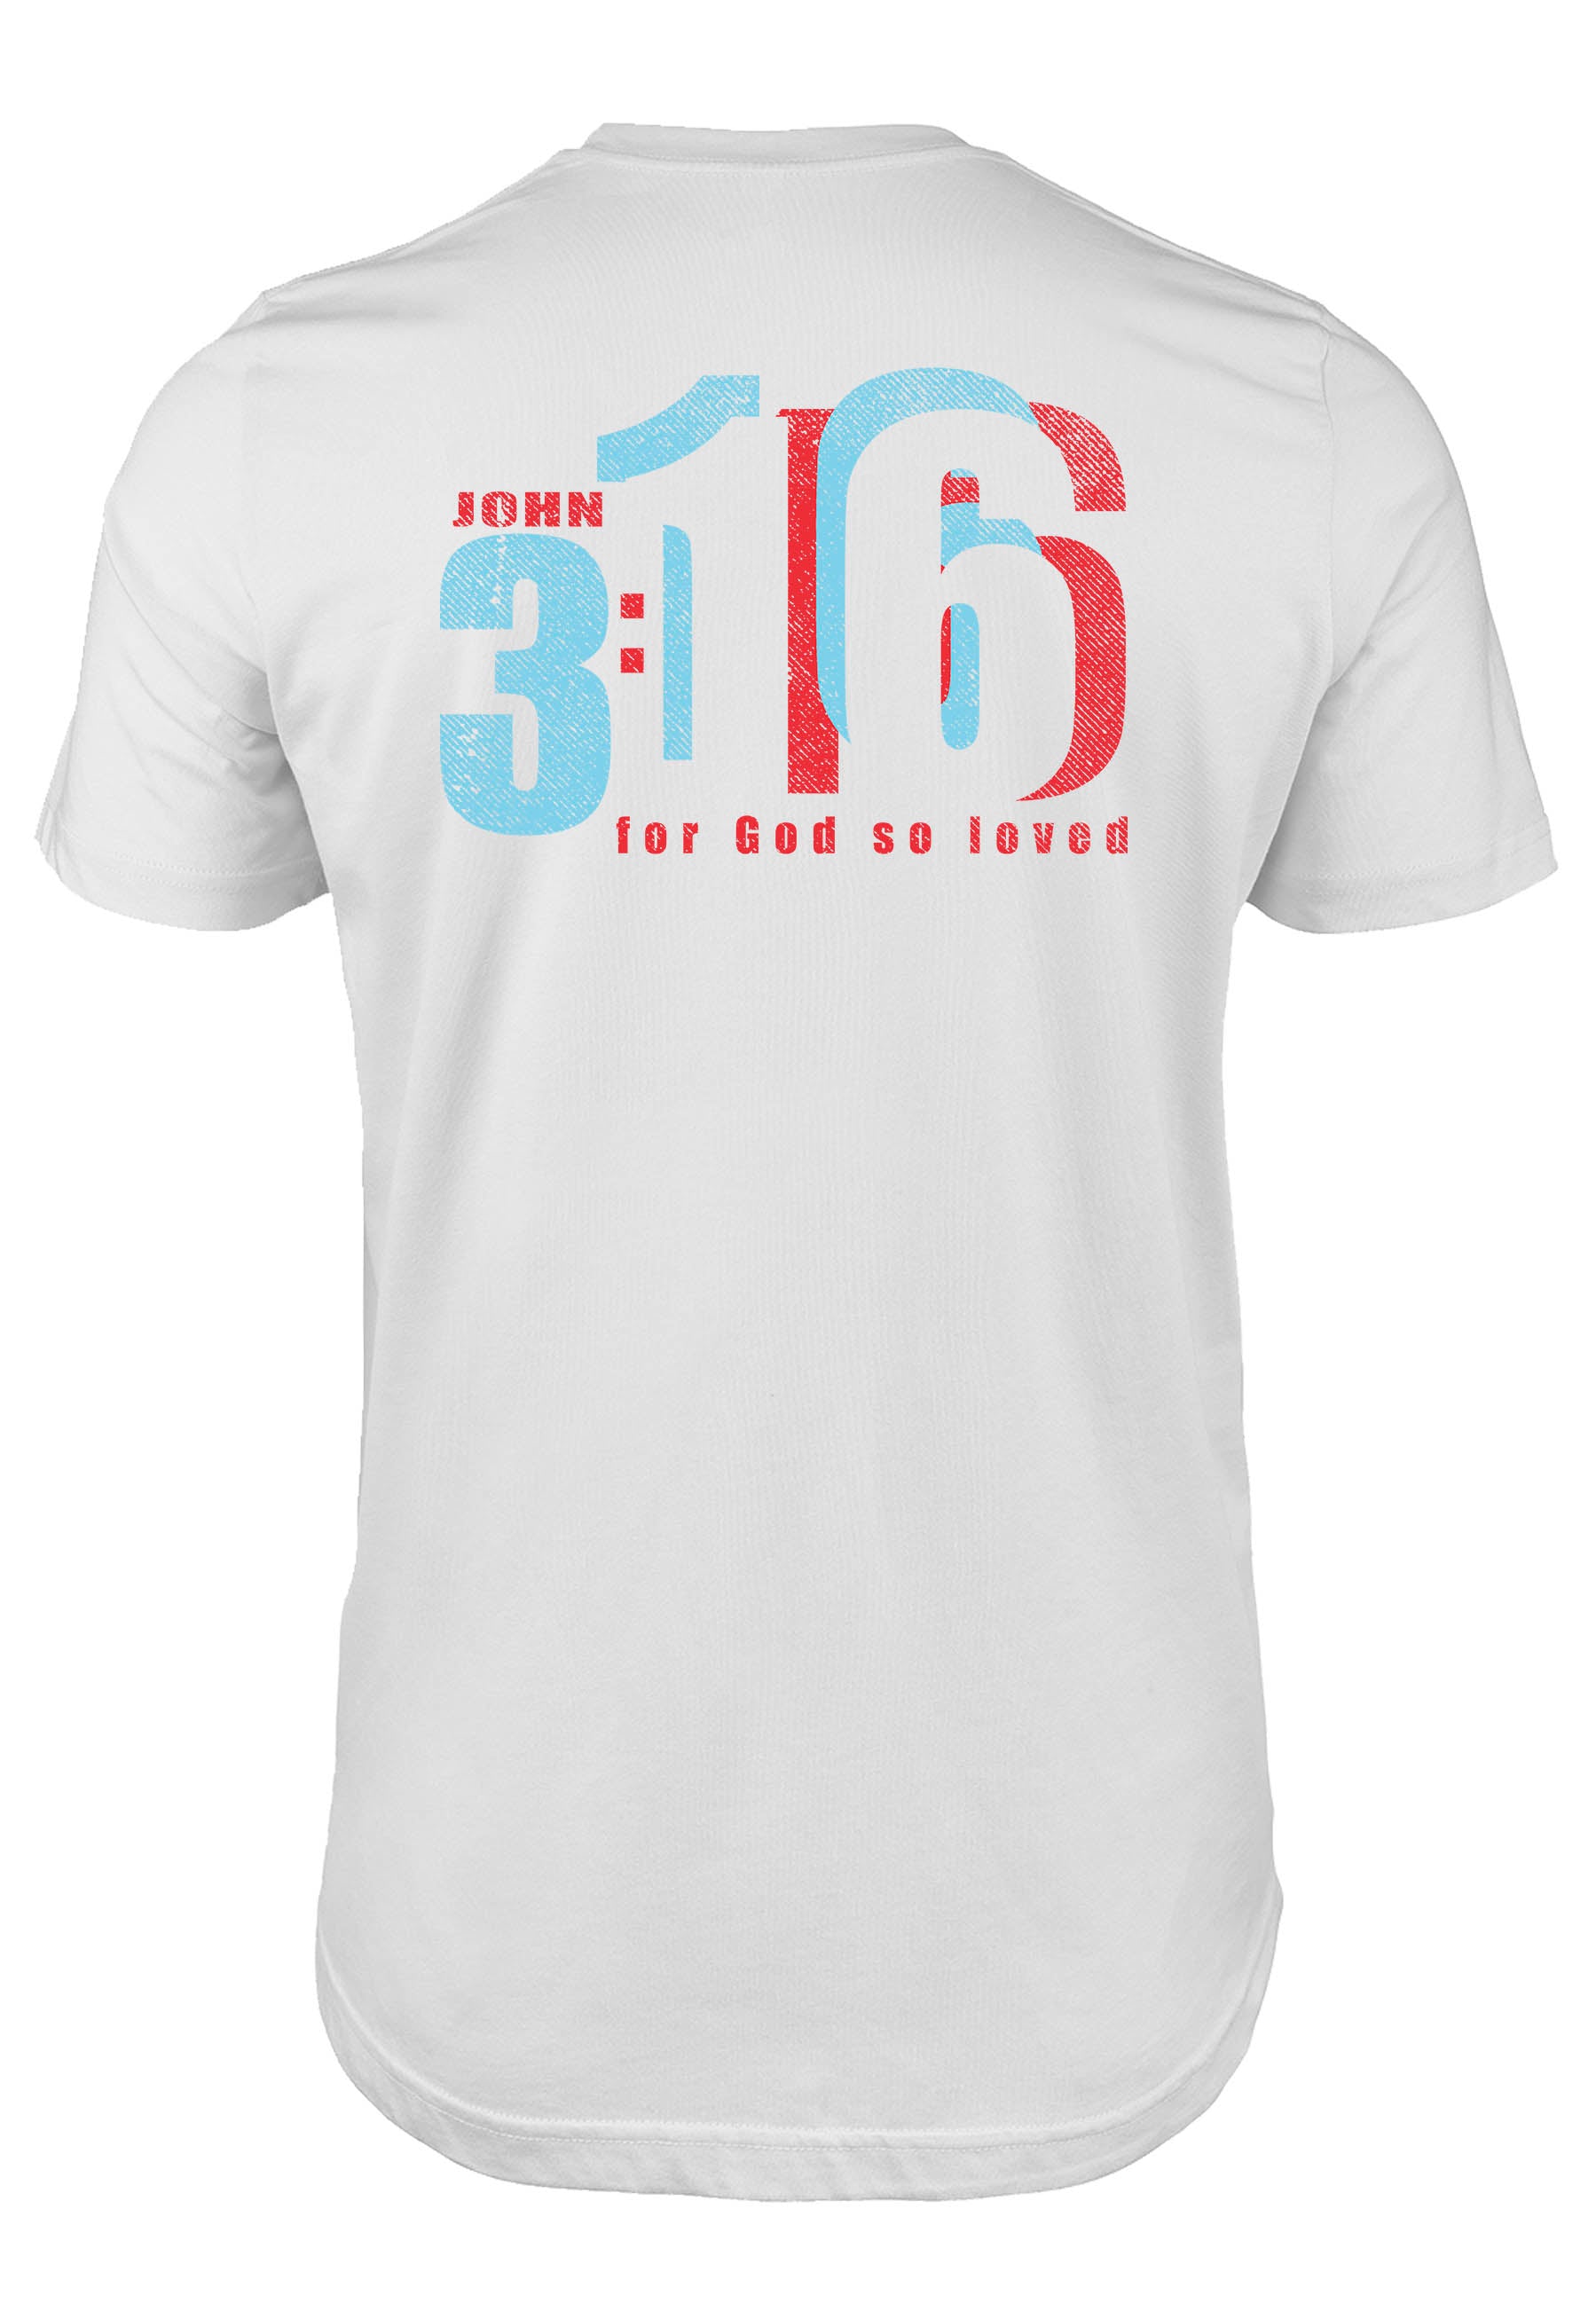 John 3:16 Christian t-shirt with abstract design